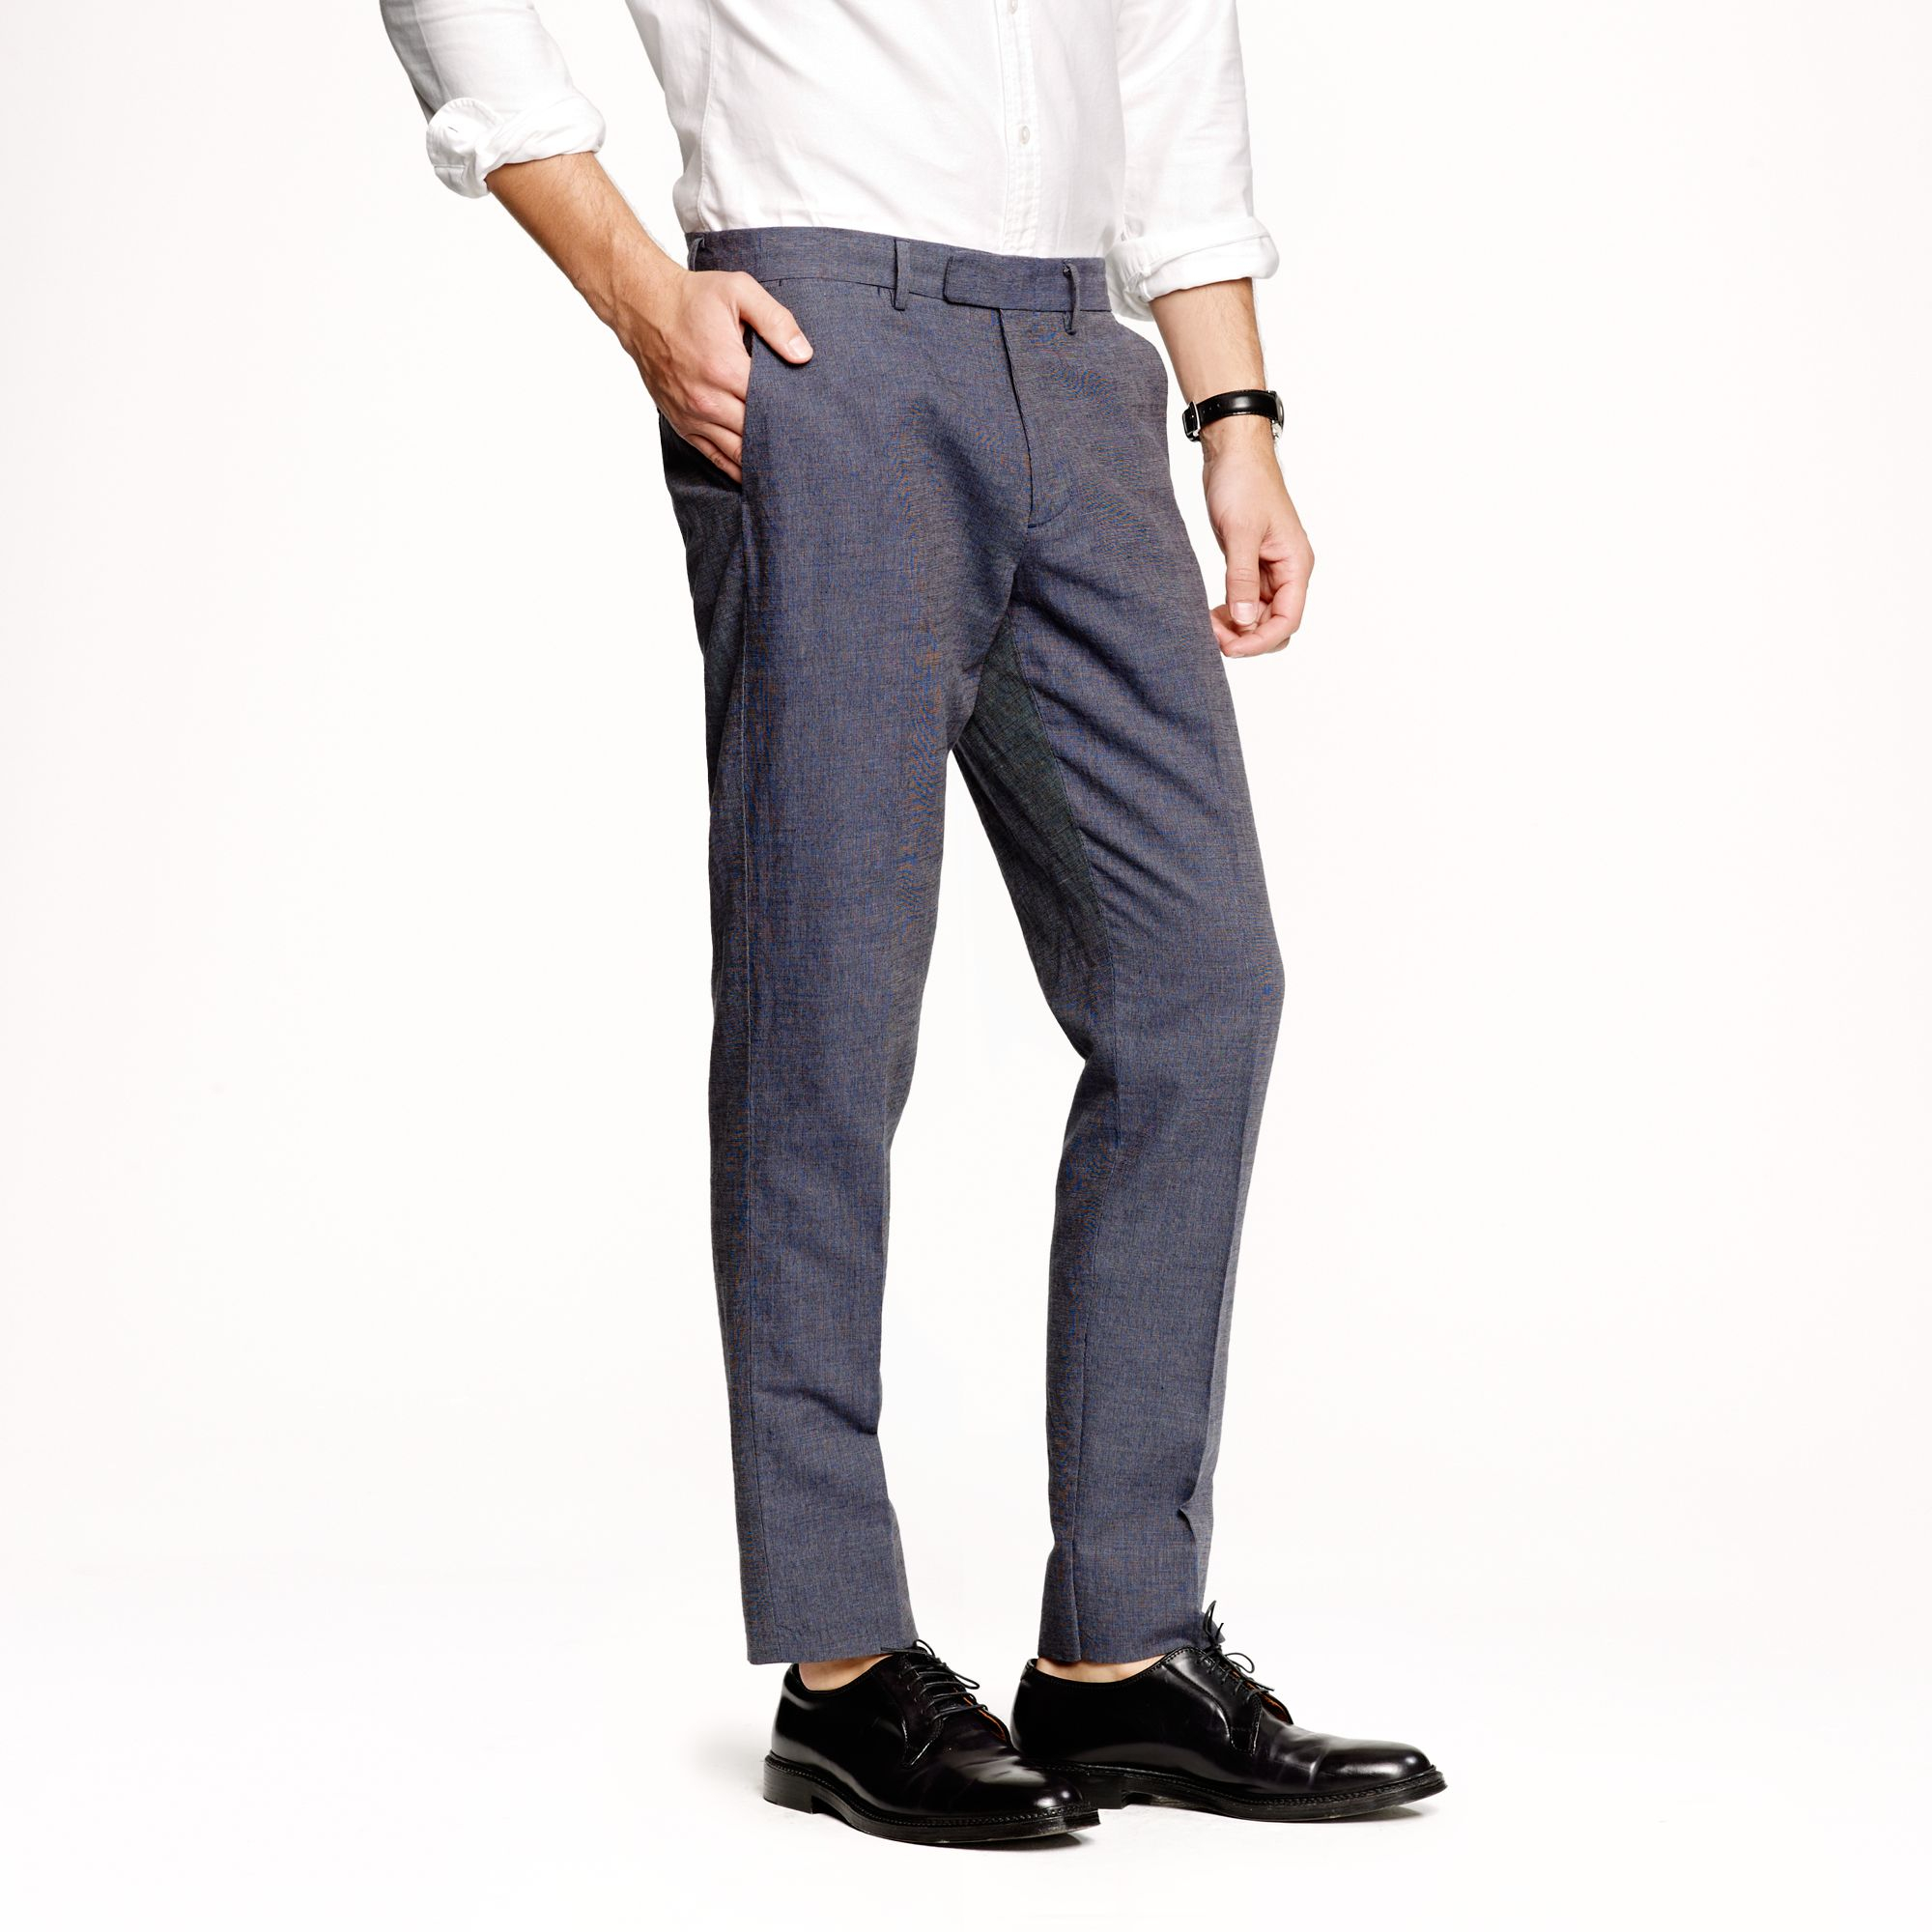 J.crew Bowery Slim Pant In Crosshatch Cotton-Linen in Blue for Men ...